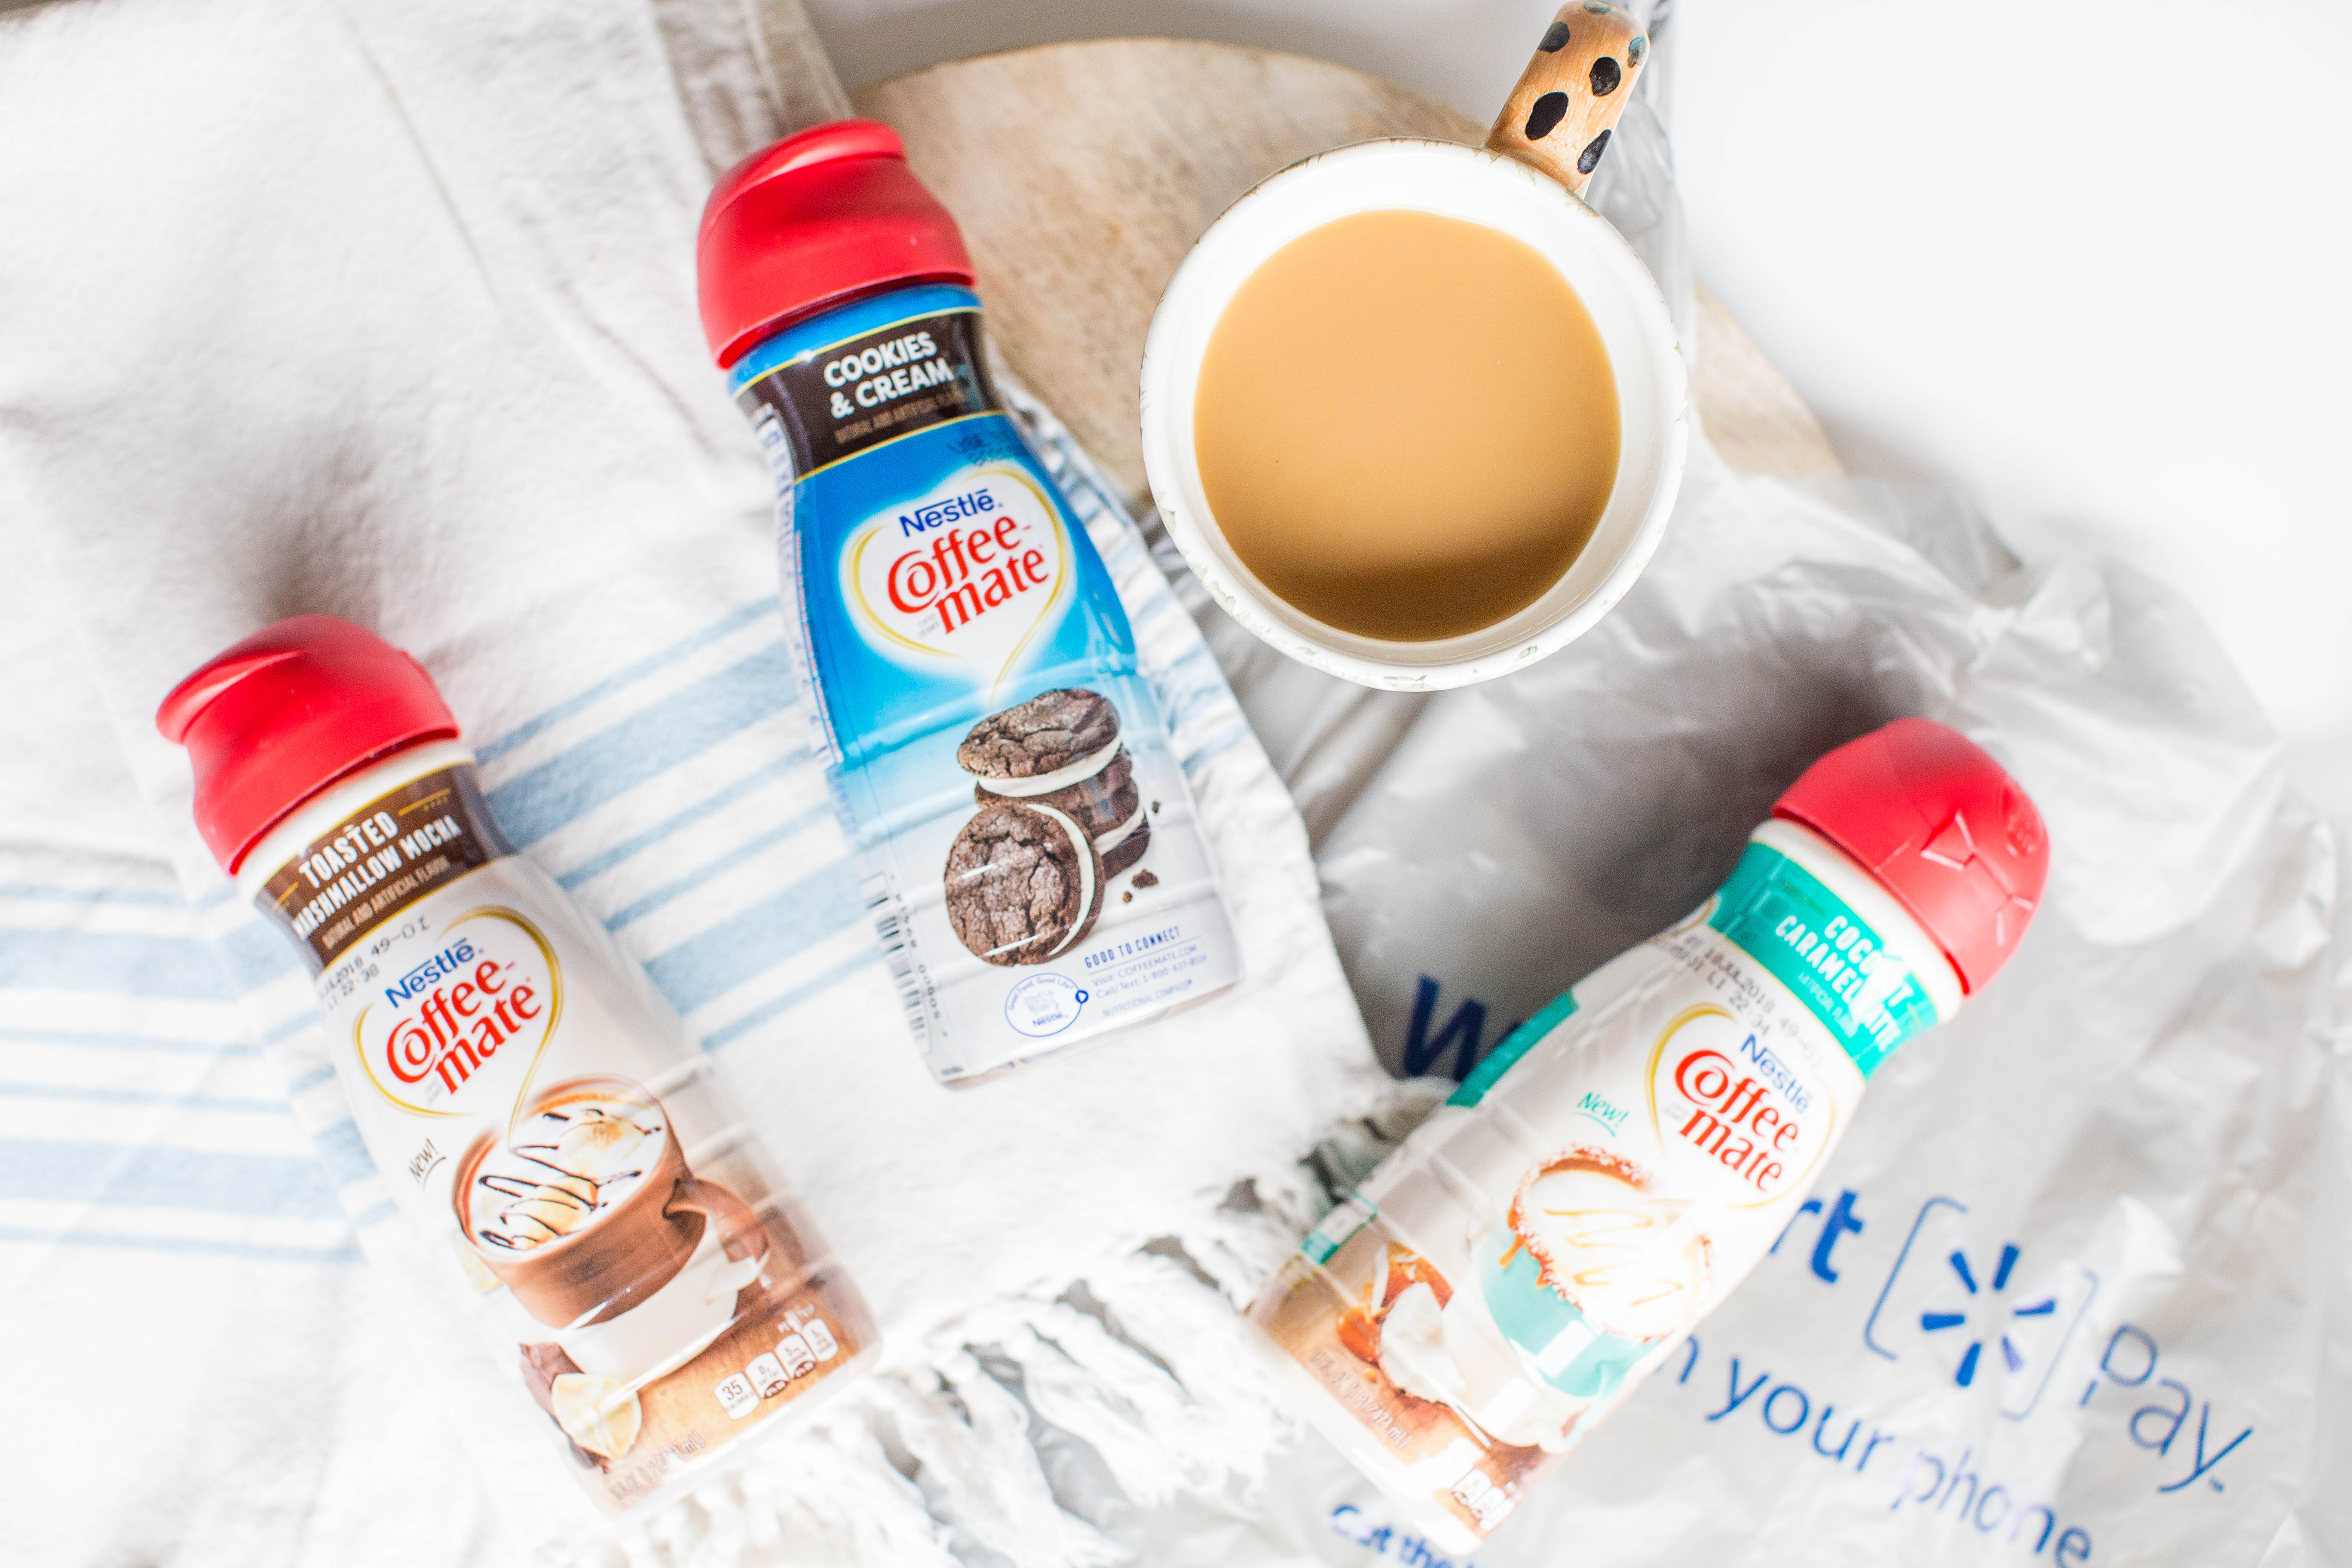  Mom Morning Routine by popular North Carolina lifestyle blogger, Coffee Beans and Bobby Pins